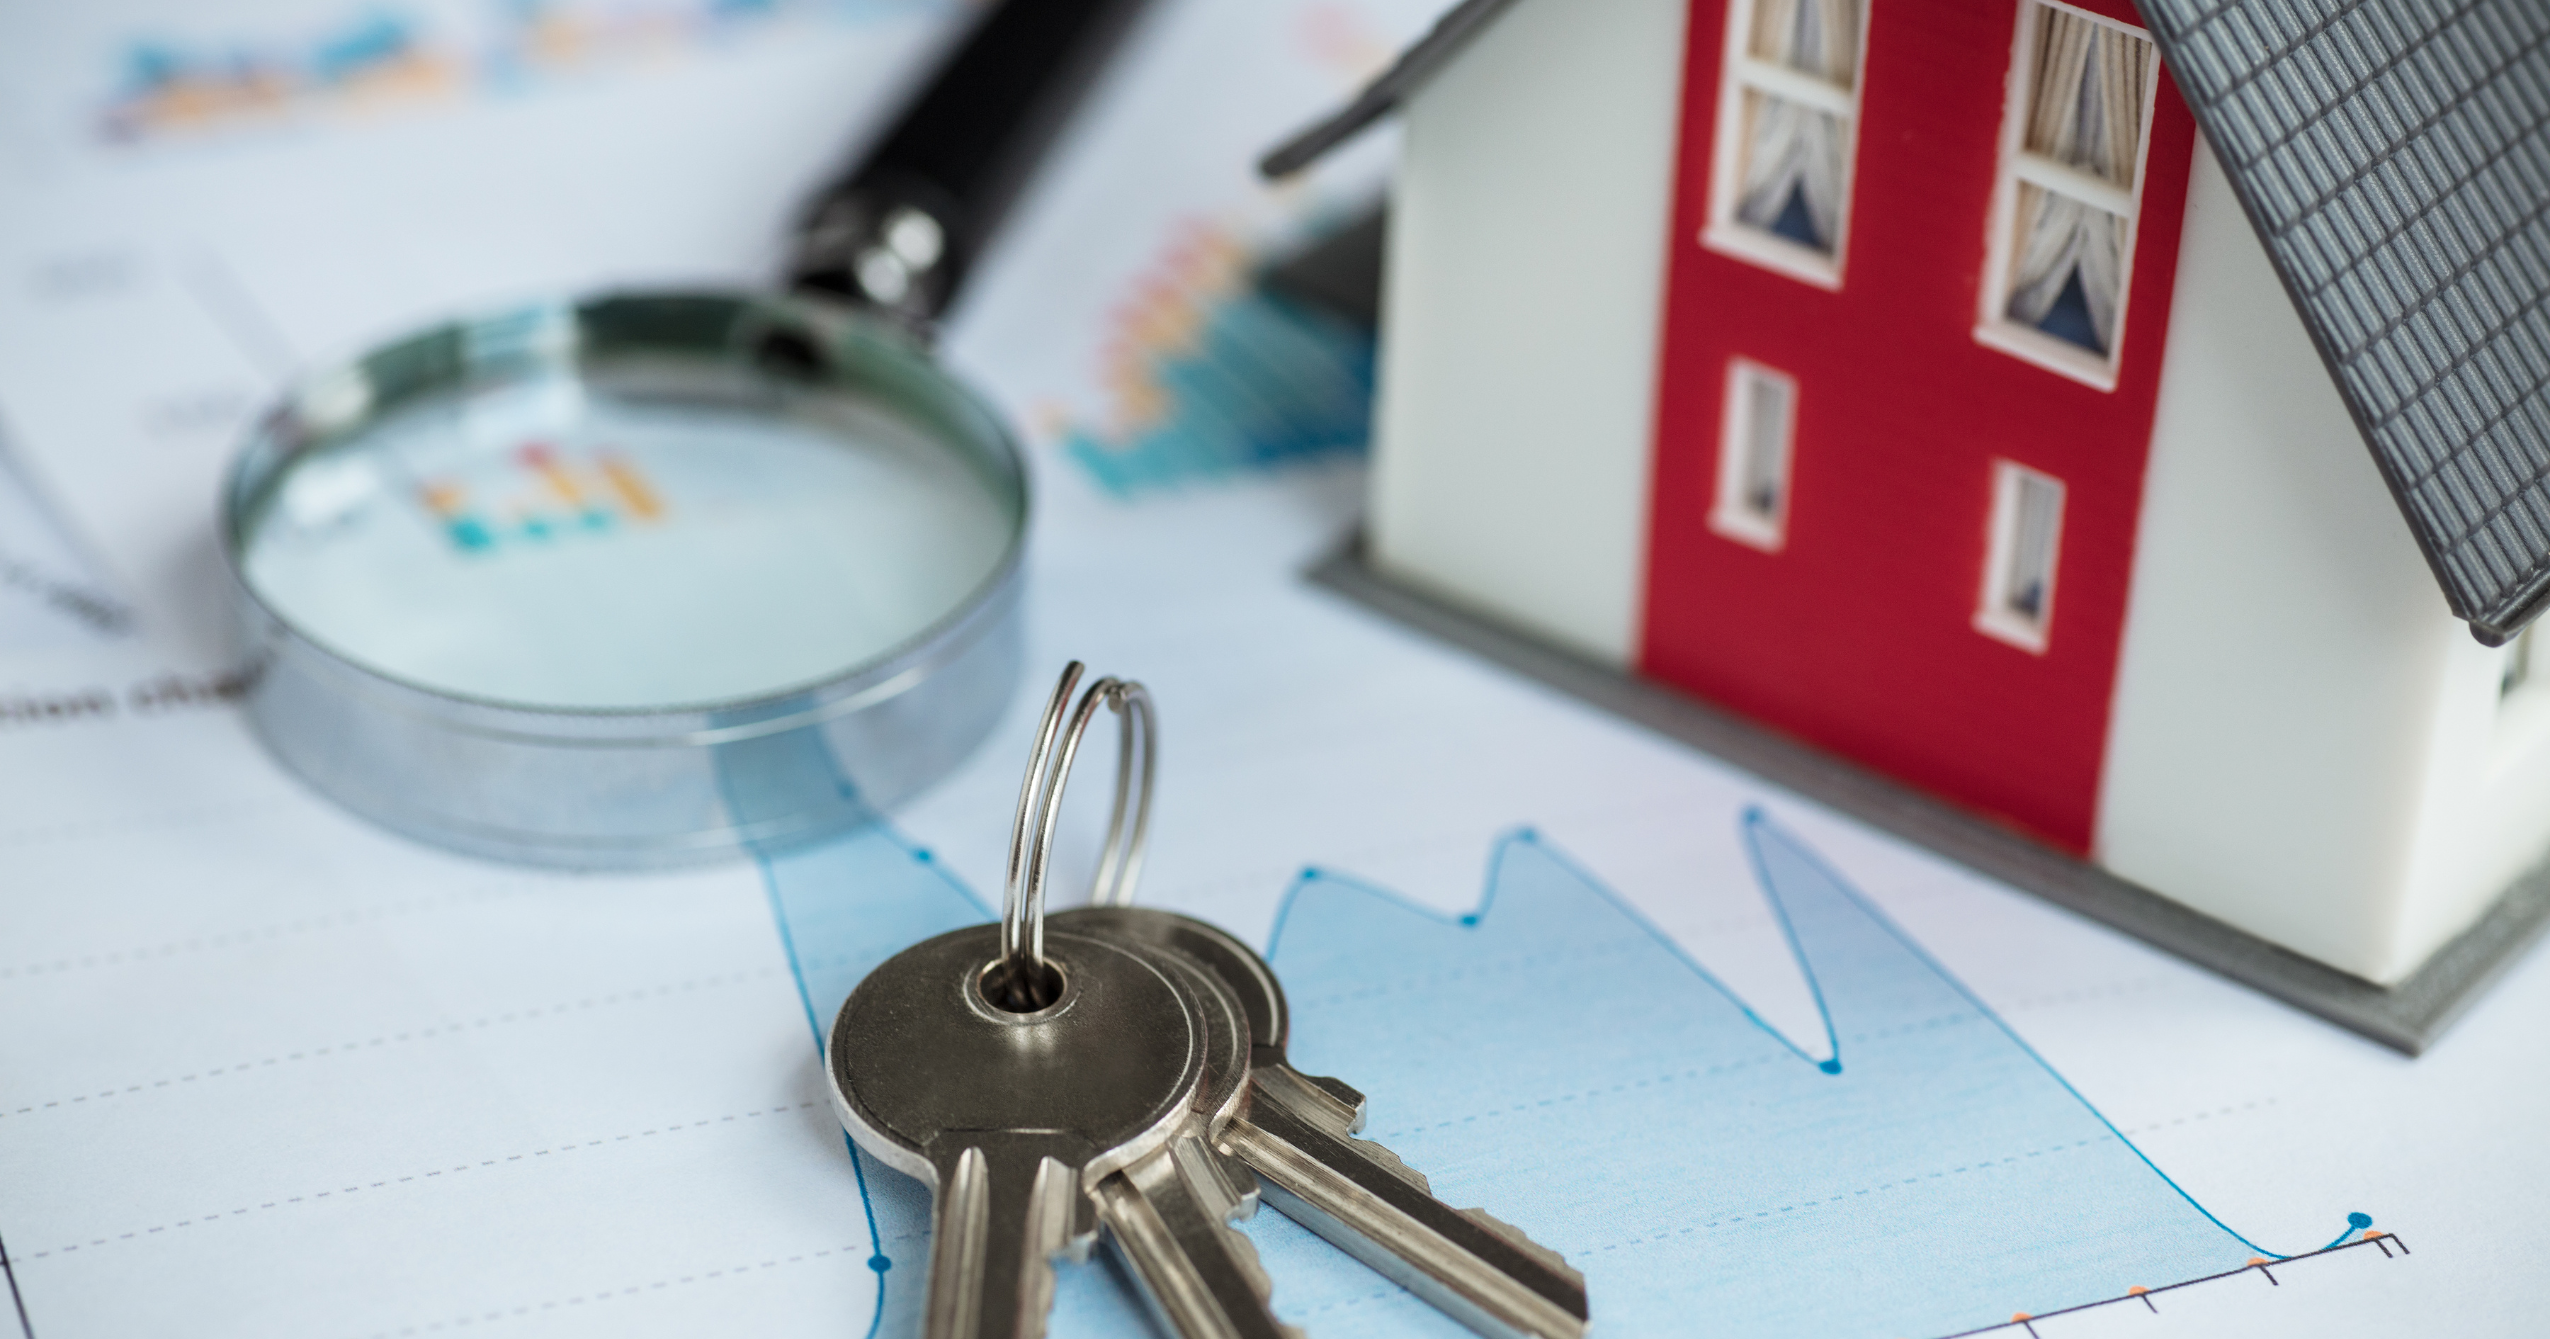 A stock image of keys - start your property search on Share to Buy!